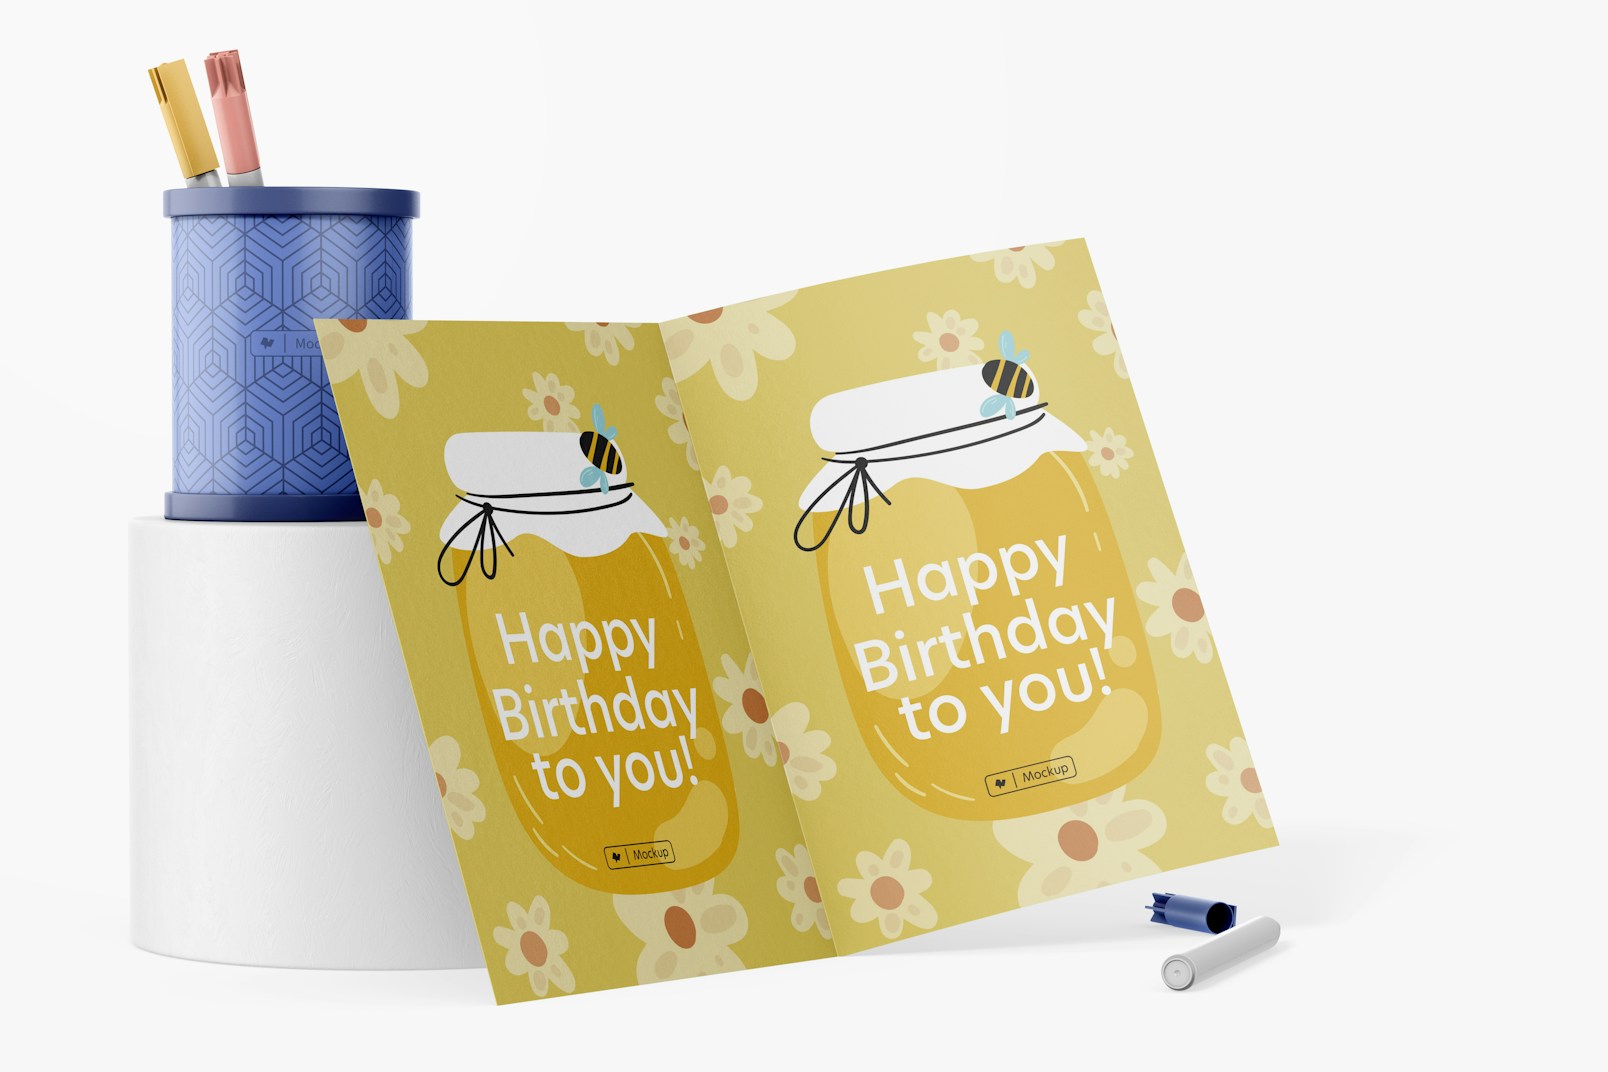 Round Pen Holder with Greeting Card Mockup